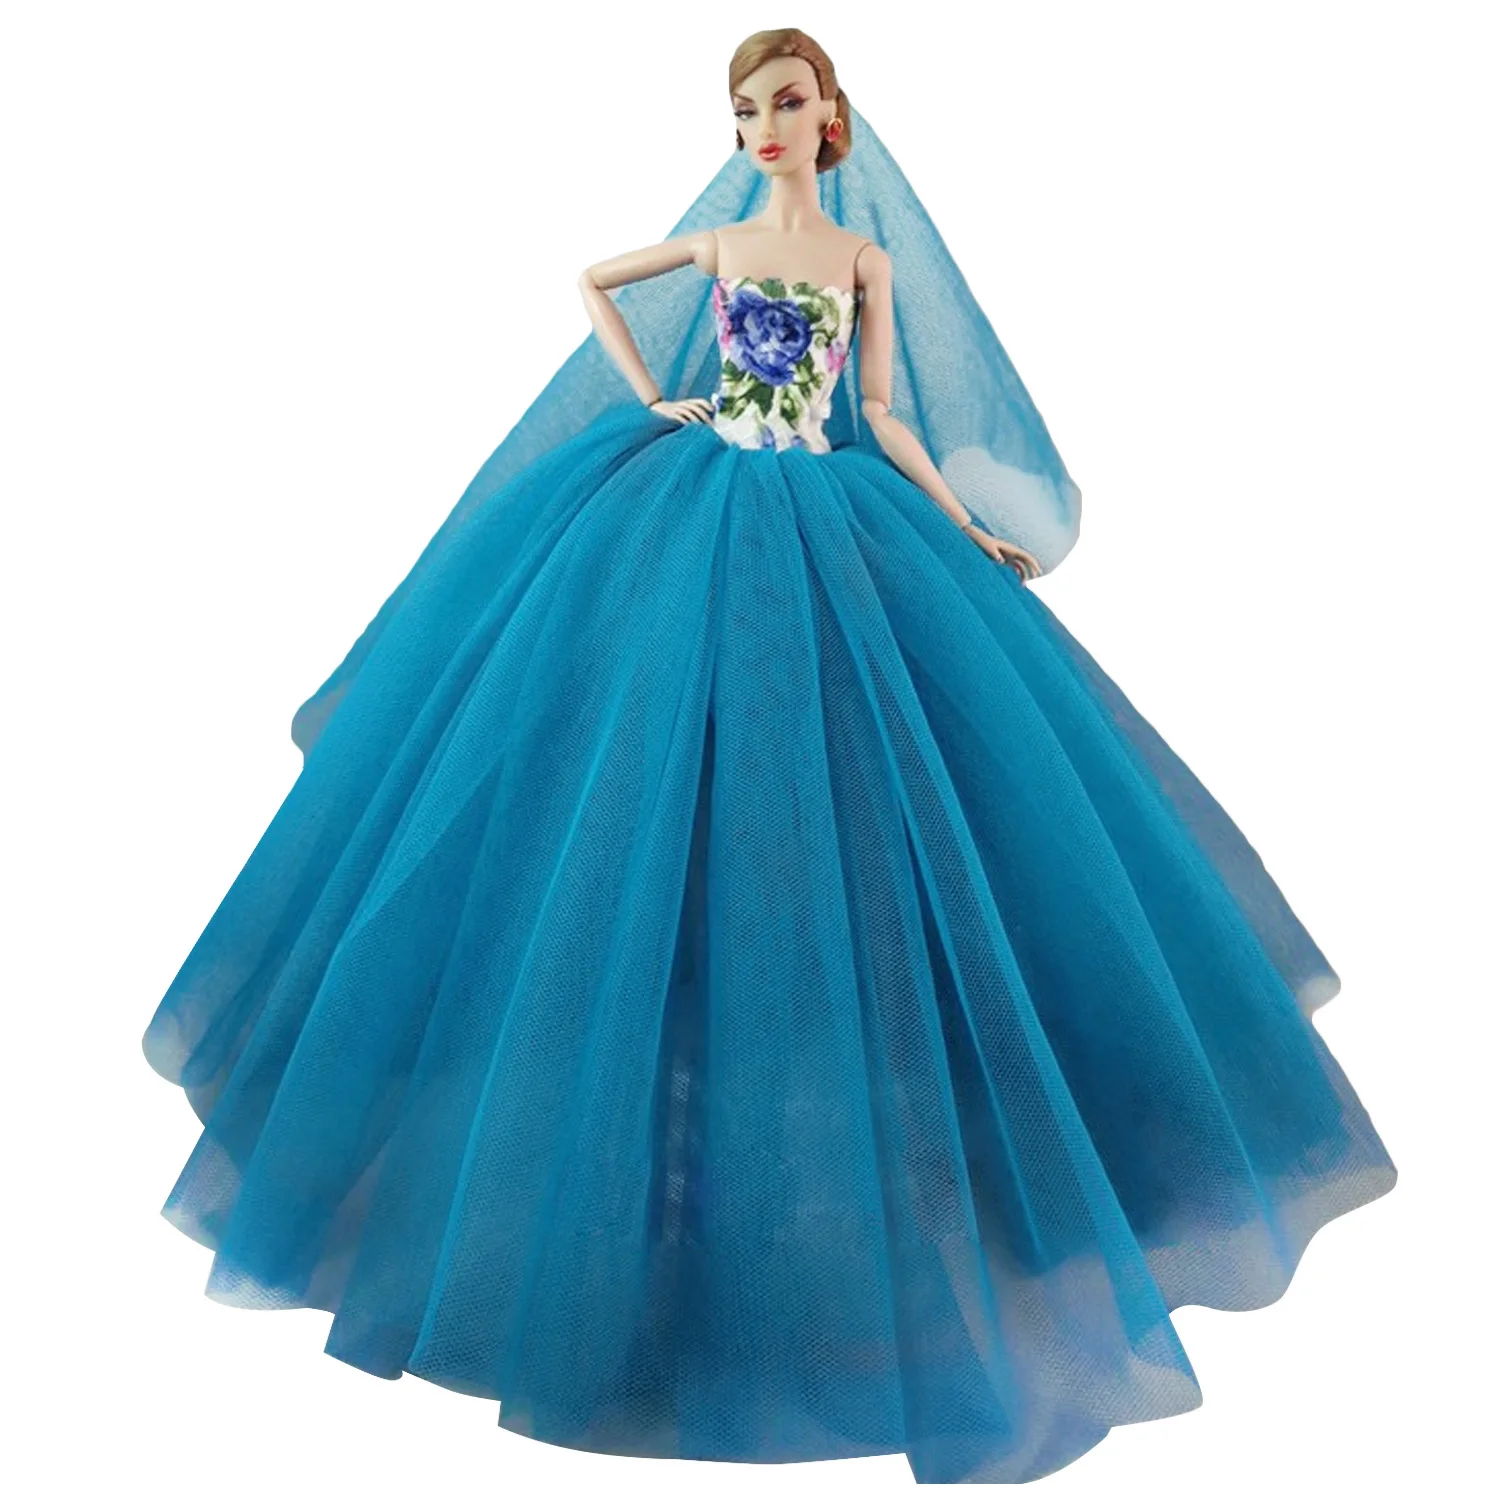 

Fashion Wedding Party Dress Outfit Clothes Costume for Barbie Dolls Accessories Children Girls Birthday Festival Gift Peacock